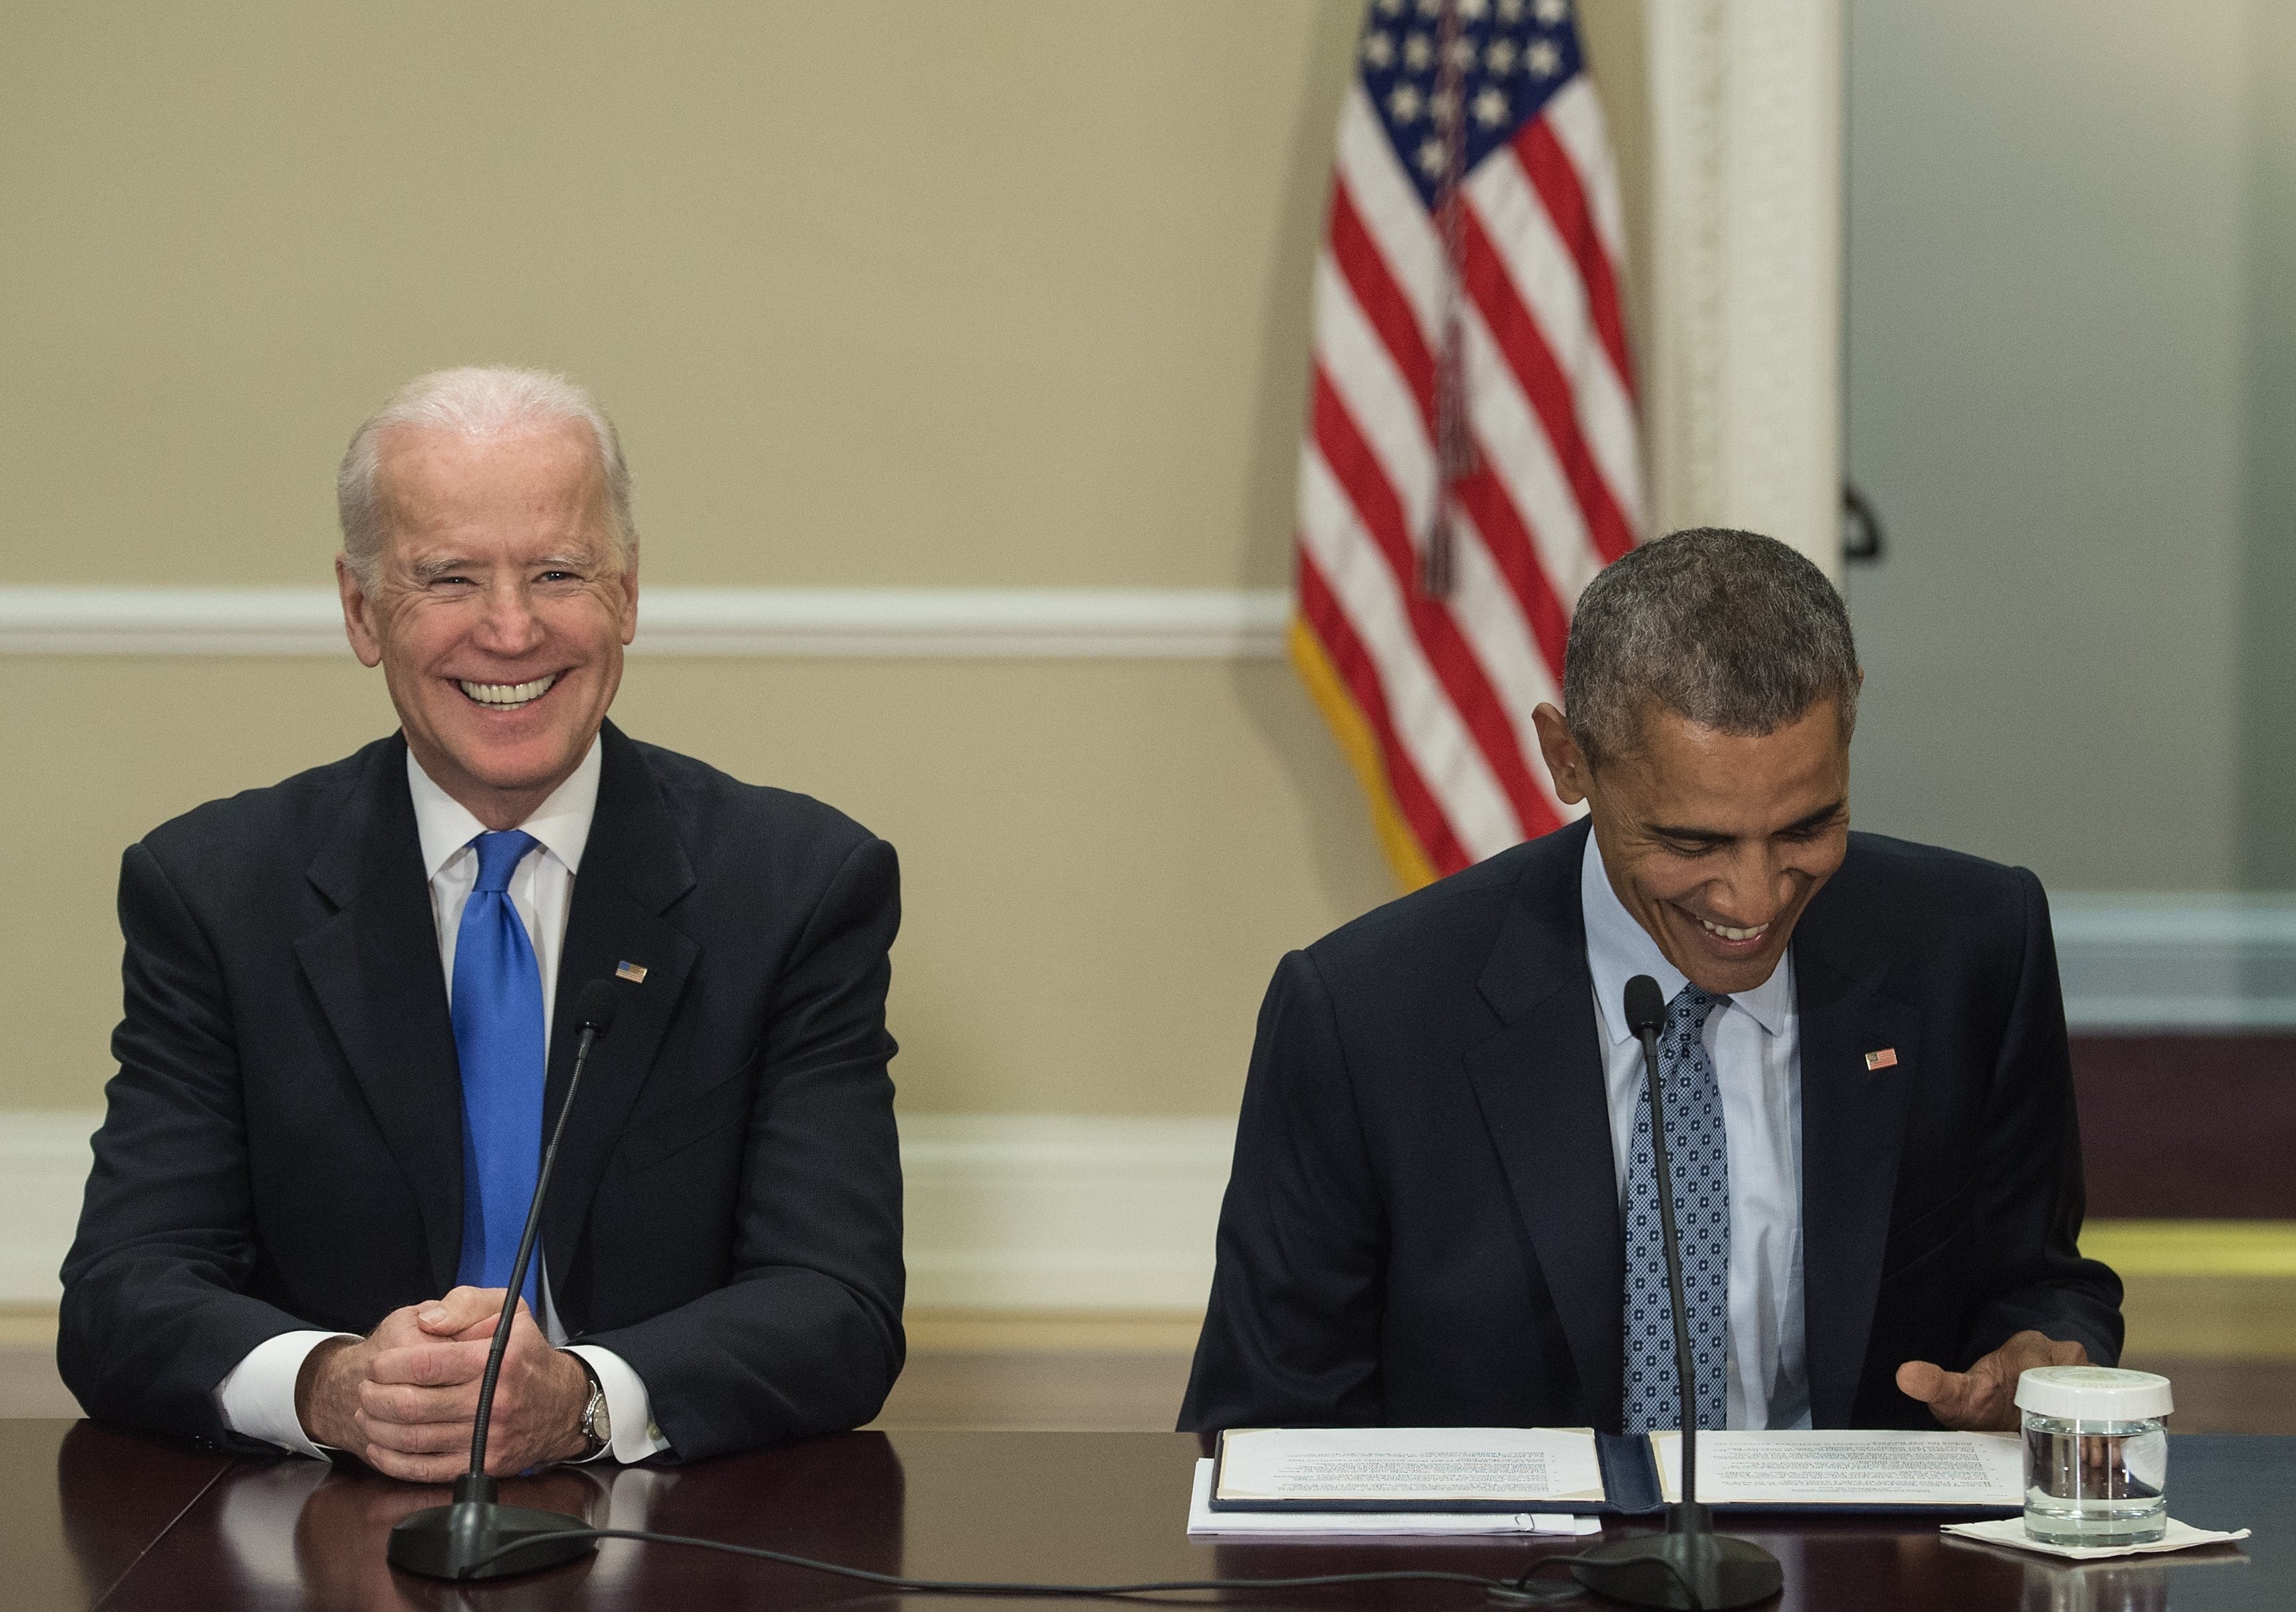 Bromance! 40 Pictures That Prove President Obama And Joe Biden Are #SquadGoals
